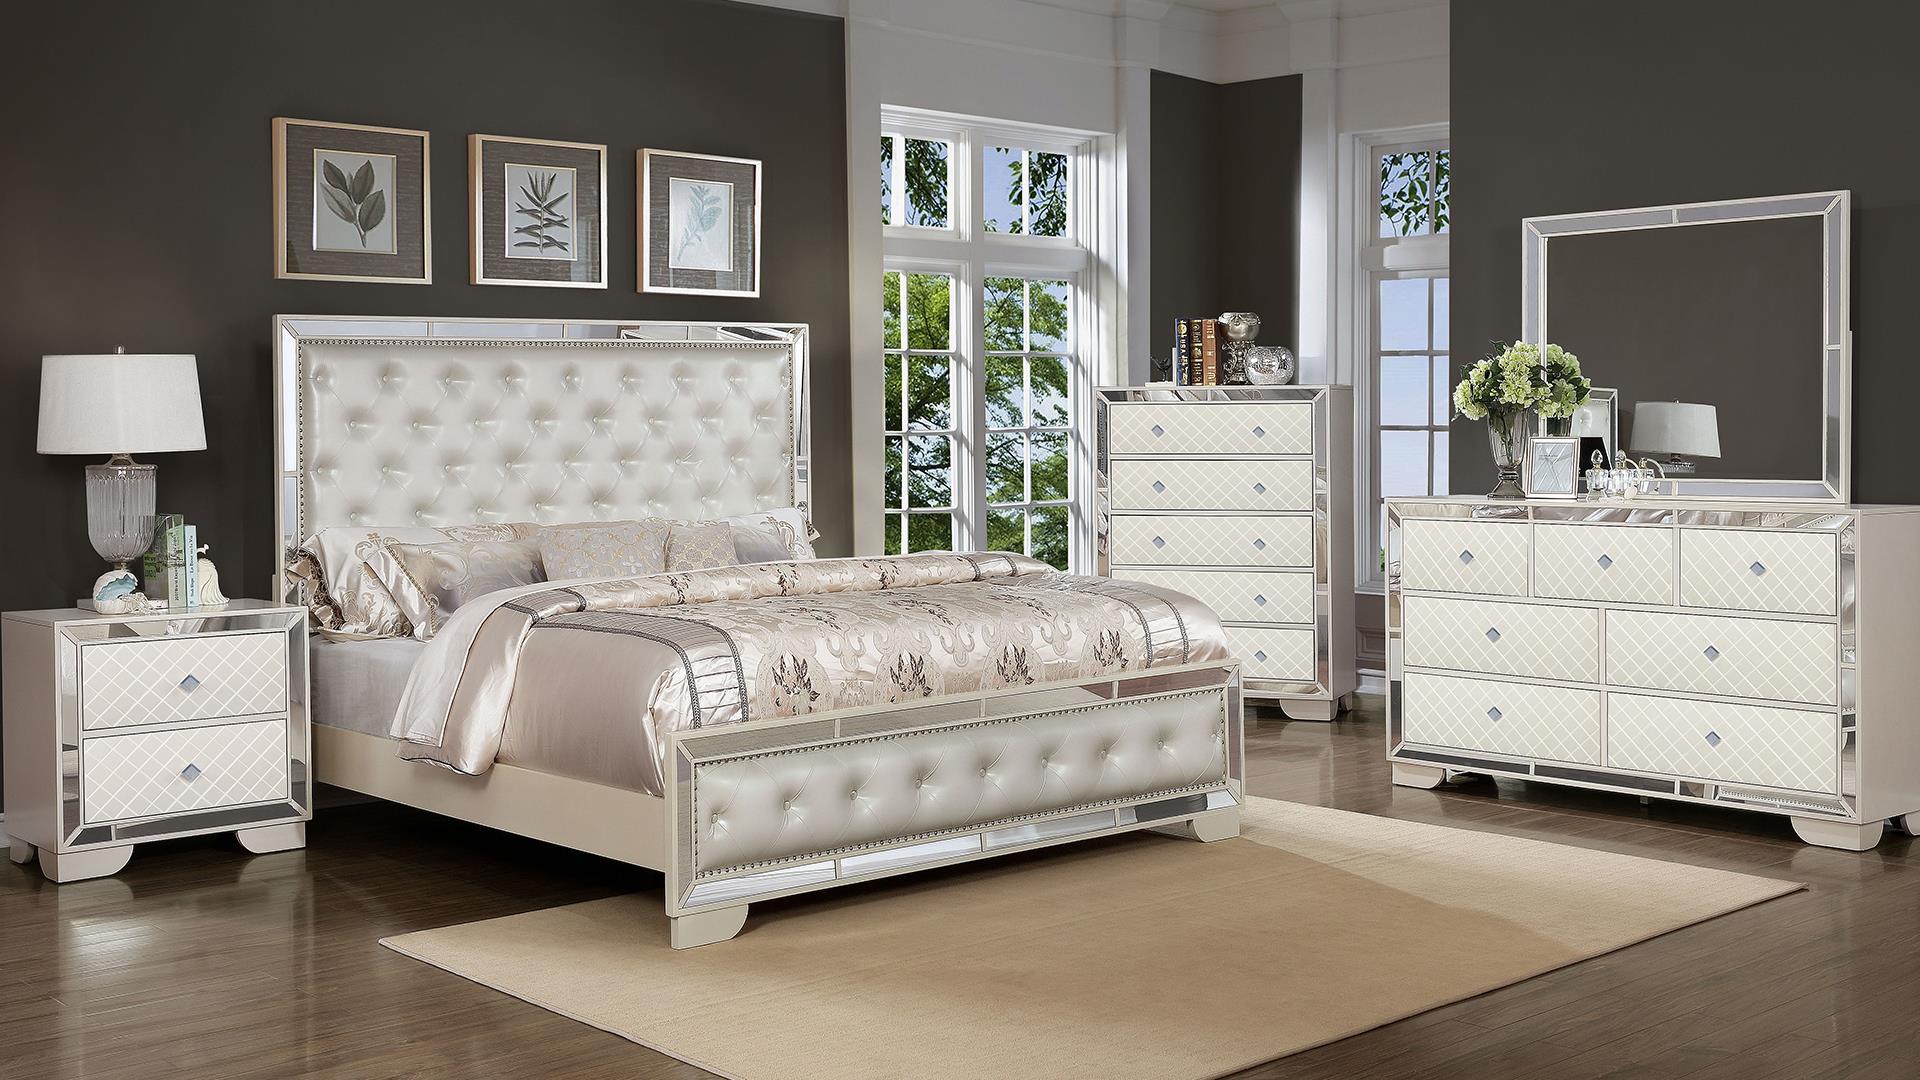 

    
Glam Beige Mirrored Inlay Tufted King Bedroom Set 4P MADISON Galaxy Home Modern
